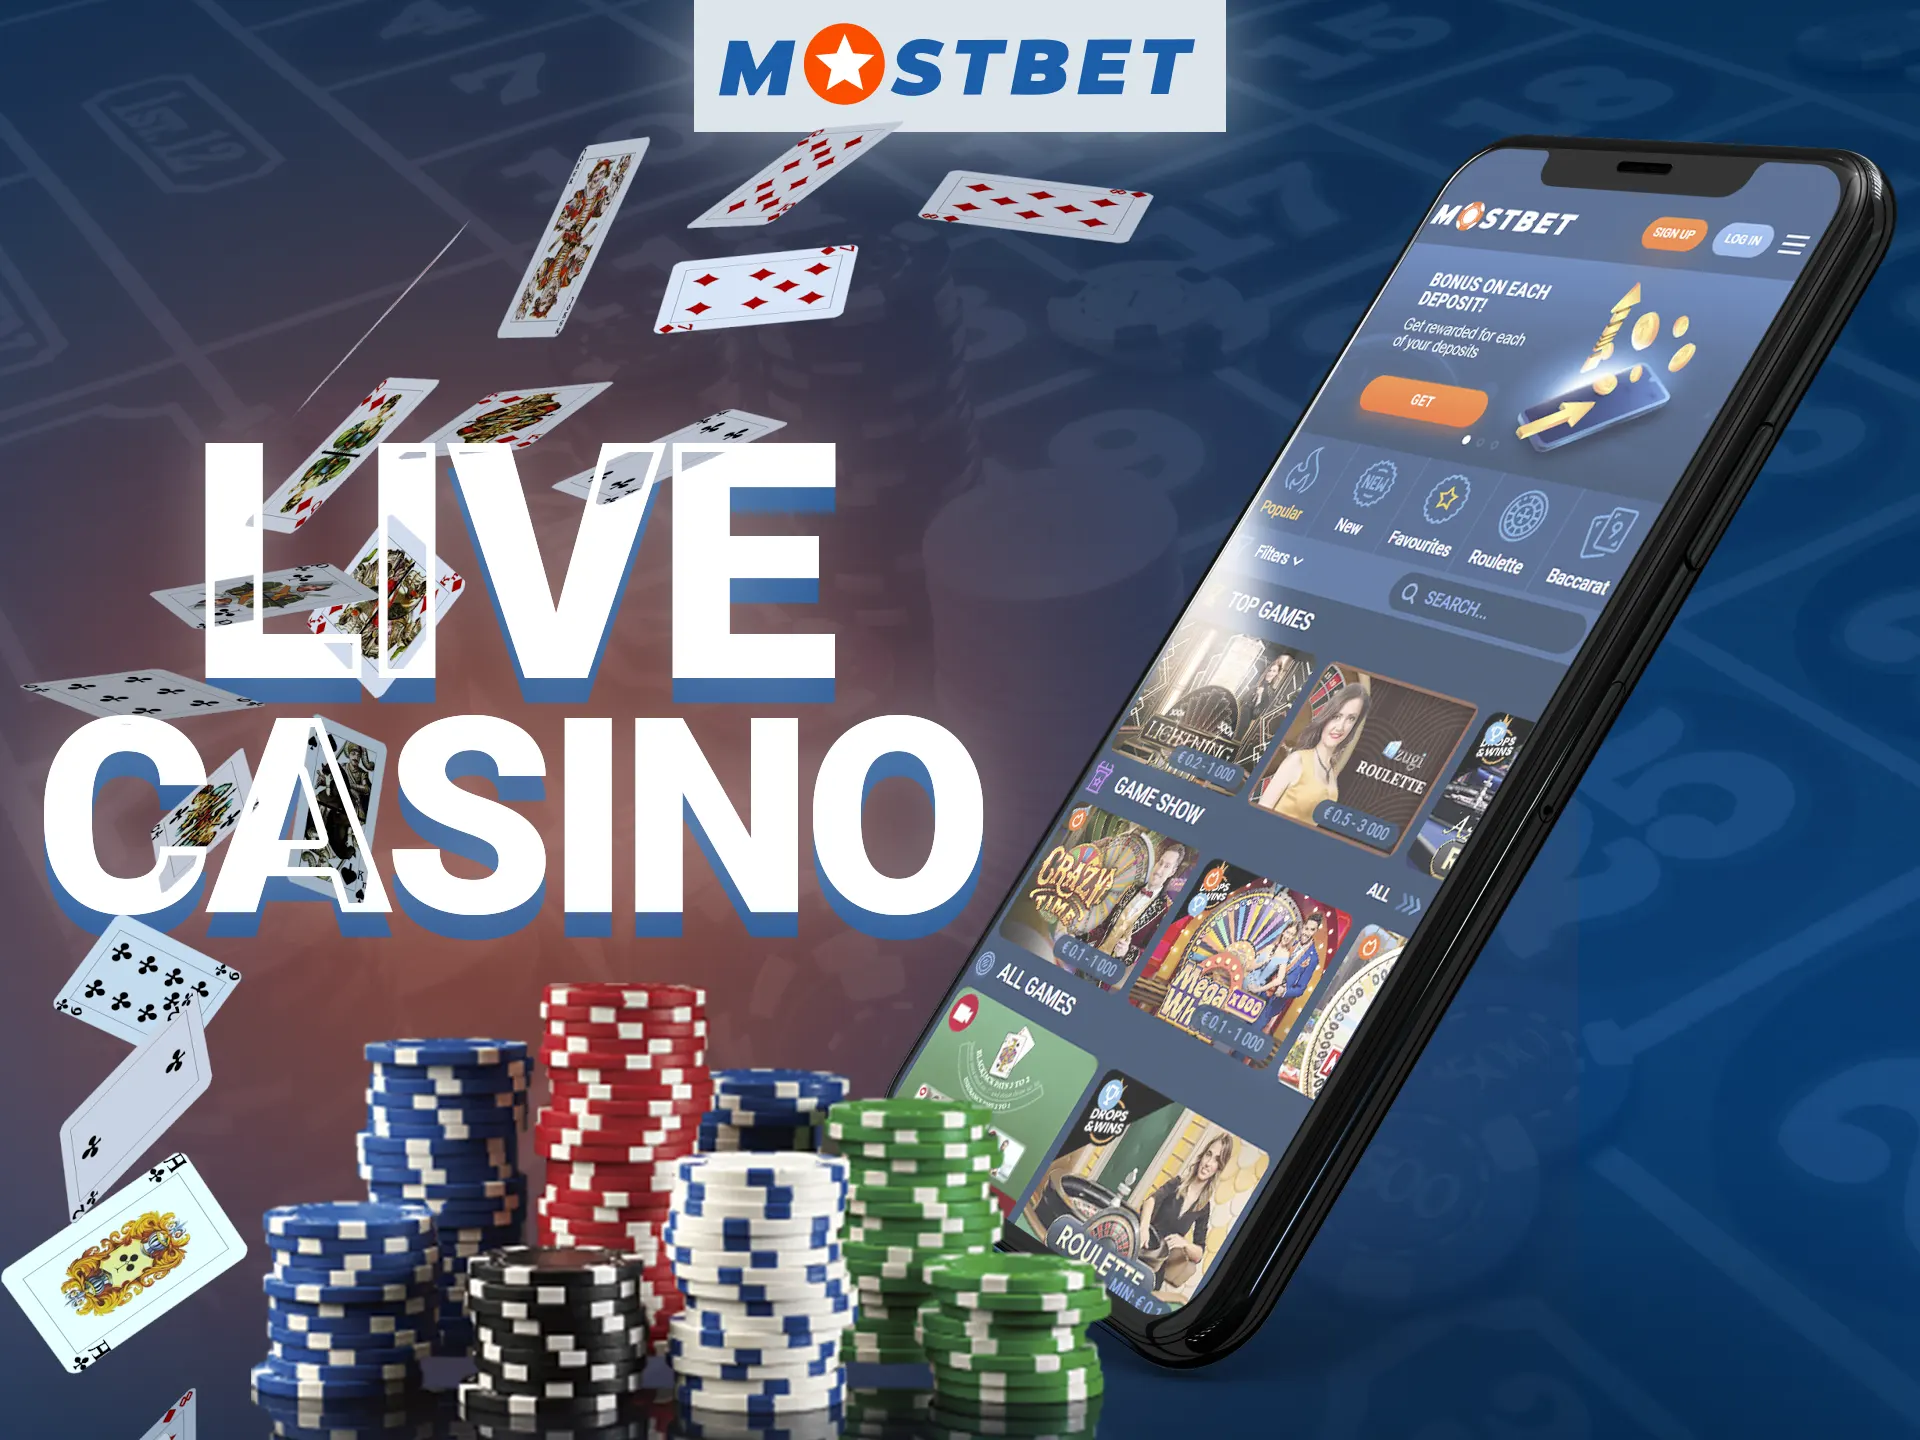 Experience the excitement of a real casino with the Live Casino feature.